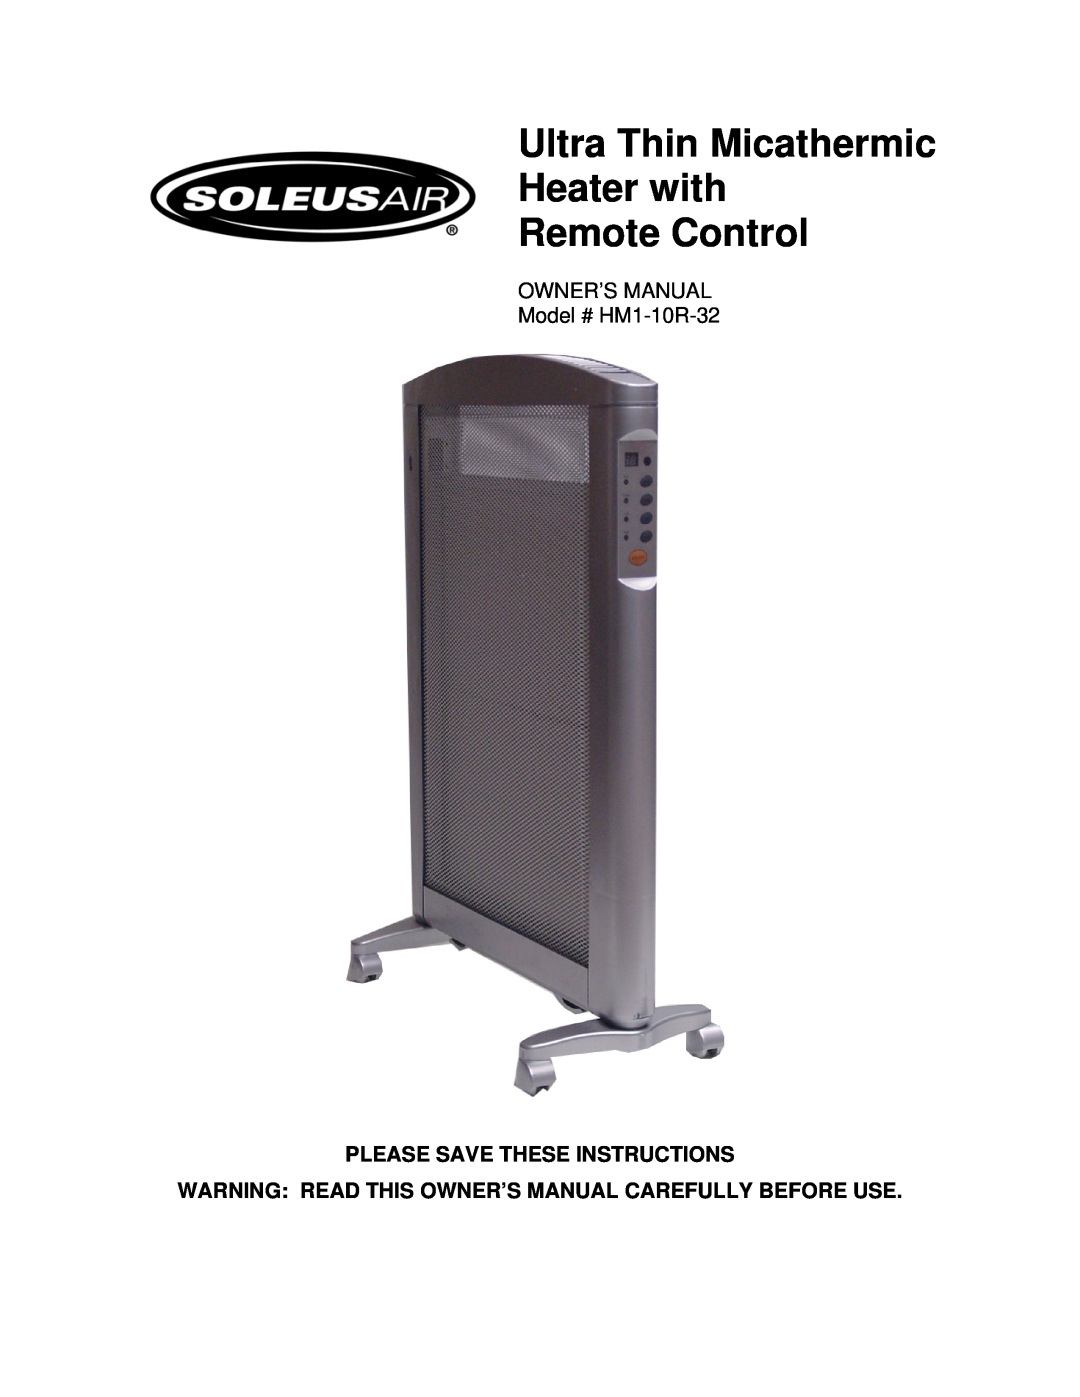 Soleus Air HM1-10R-32 owner manual Ultra Thin Micathermic Heater with Remote Control, Please Save These Instructions 